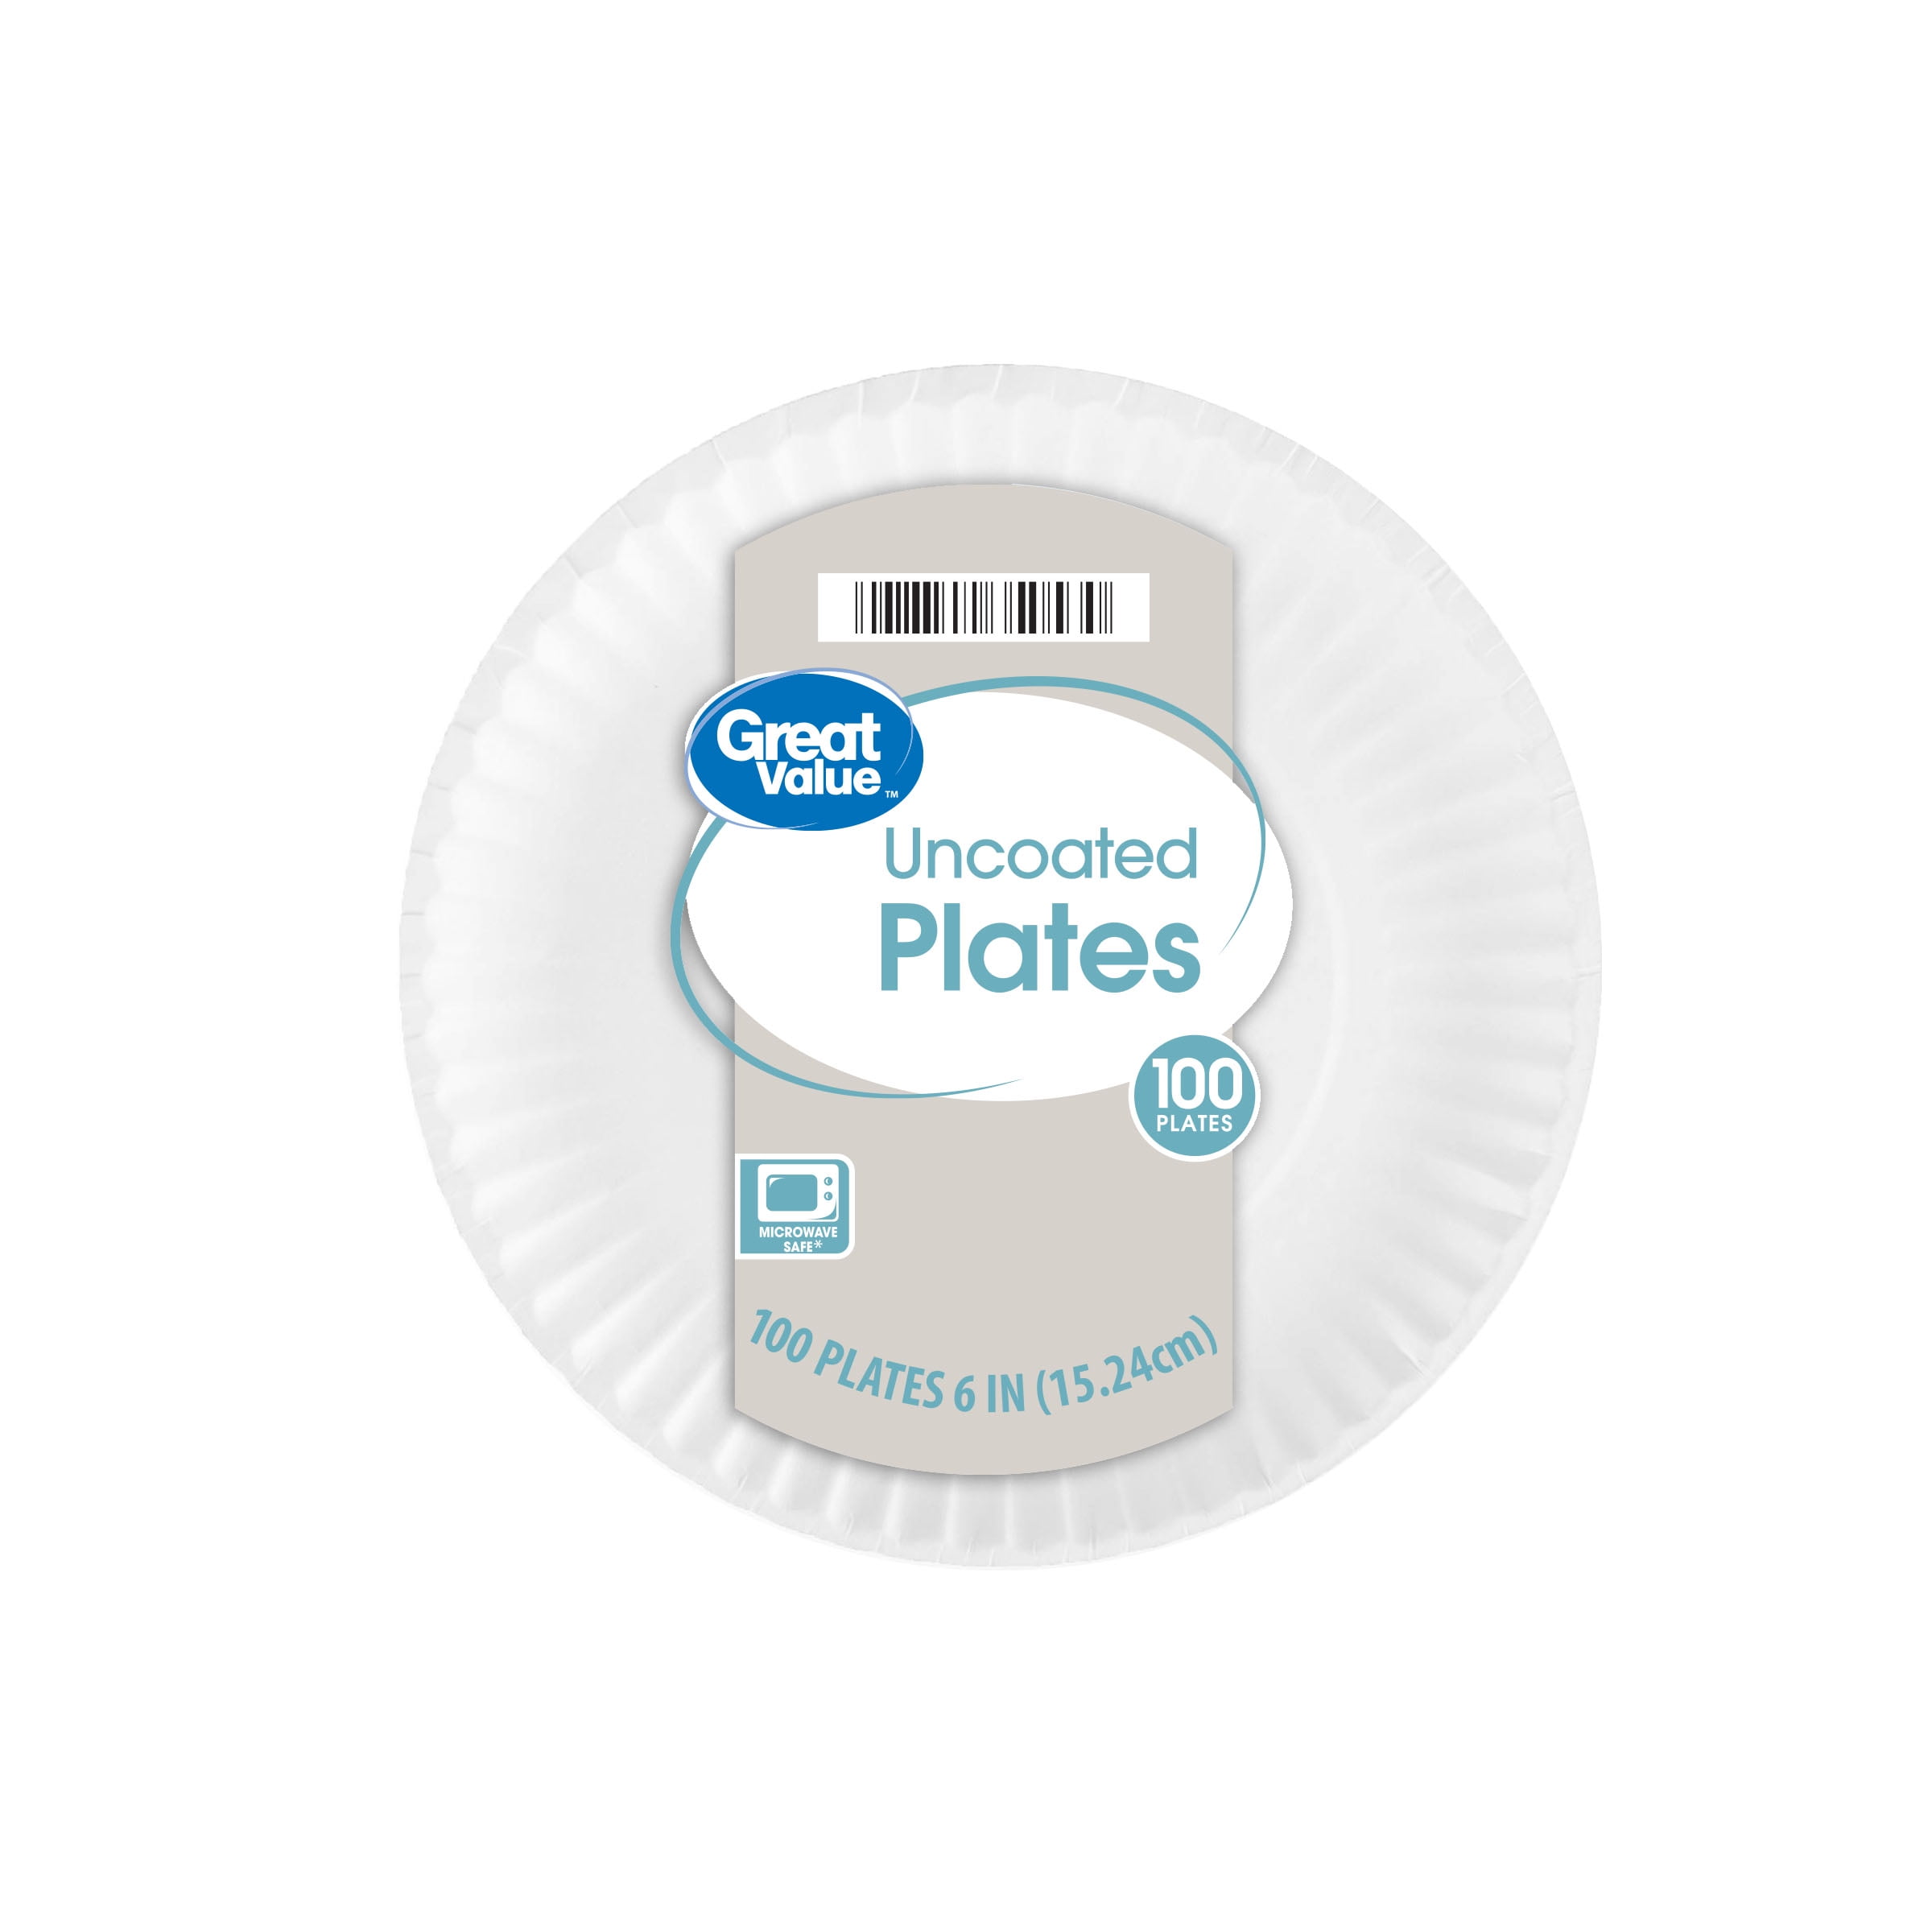 Stock Your Home 6-Inch Paper Plates Uncoated, Everyday Disposable Dessert  Plates 6 Paper Plate Bulk, White, 500 Count